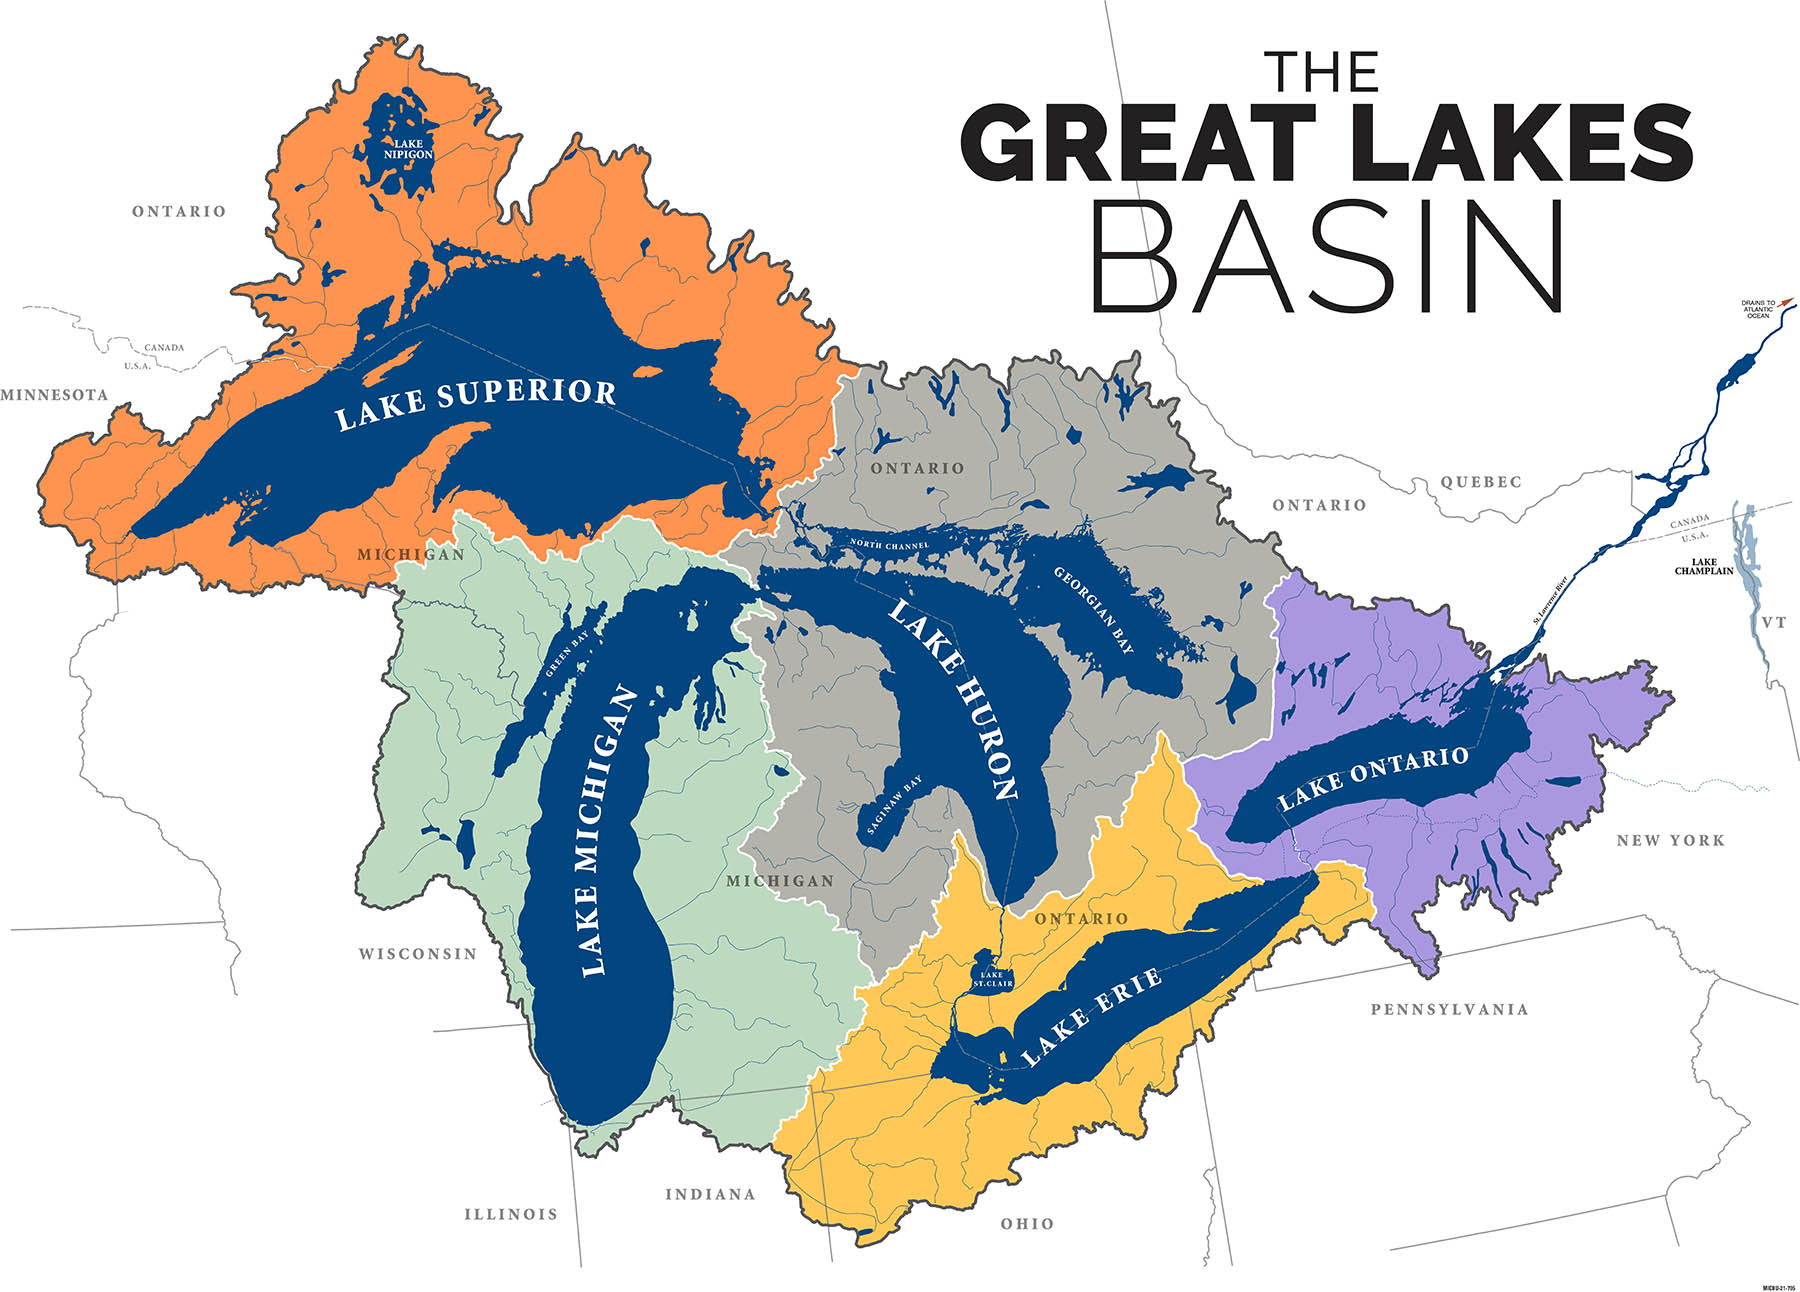 A map that depicts the Great Lakes Basin with each lake watershed being called out.